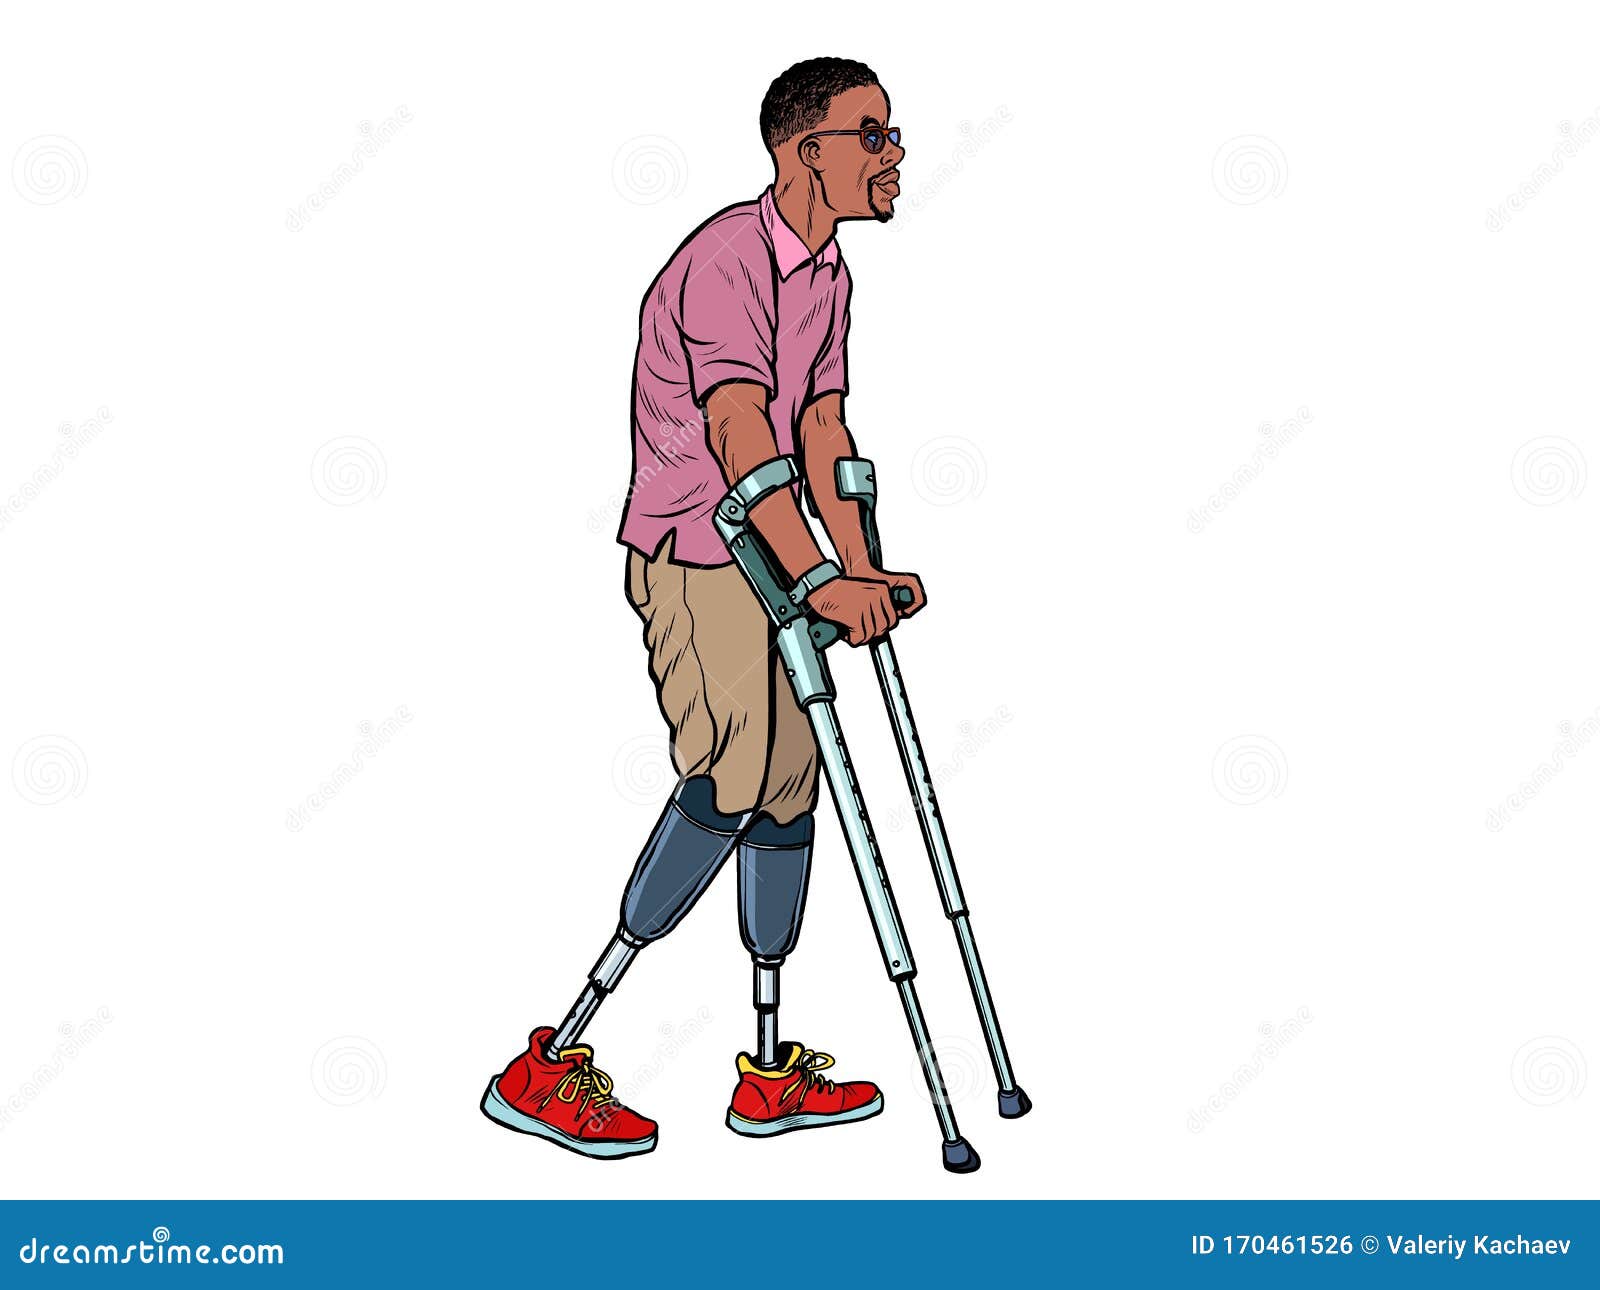 legless african veteran with a bionic prosthesis with crutches. a disabled man learns to walk after an injury